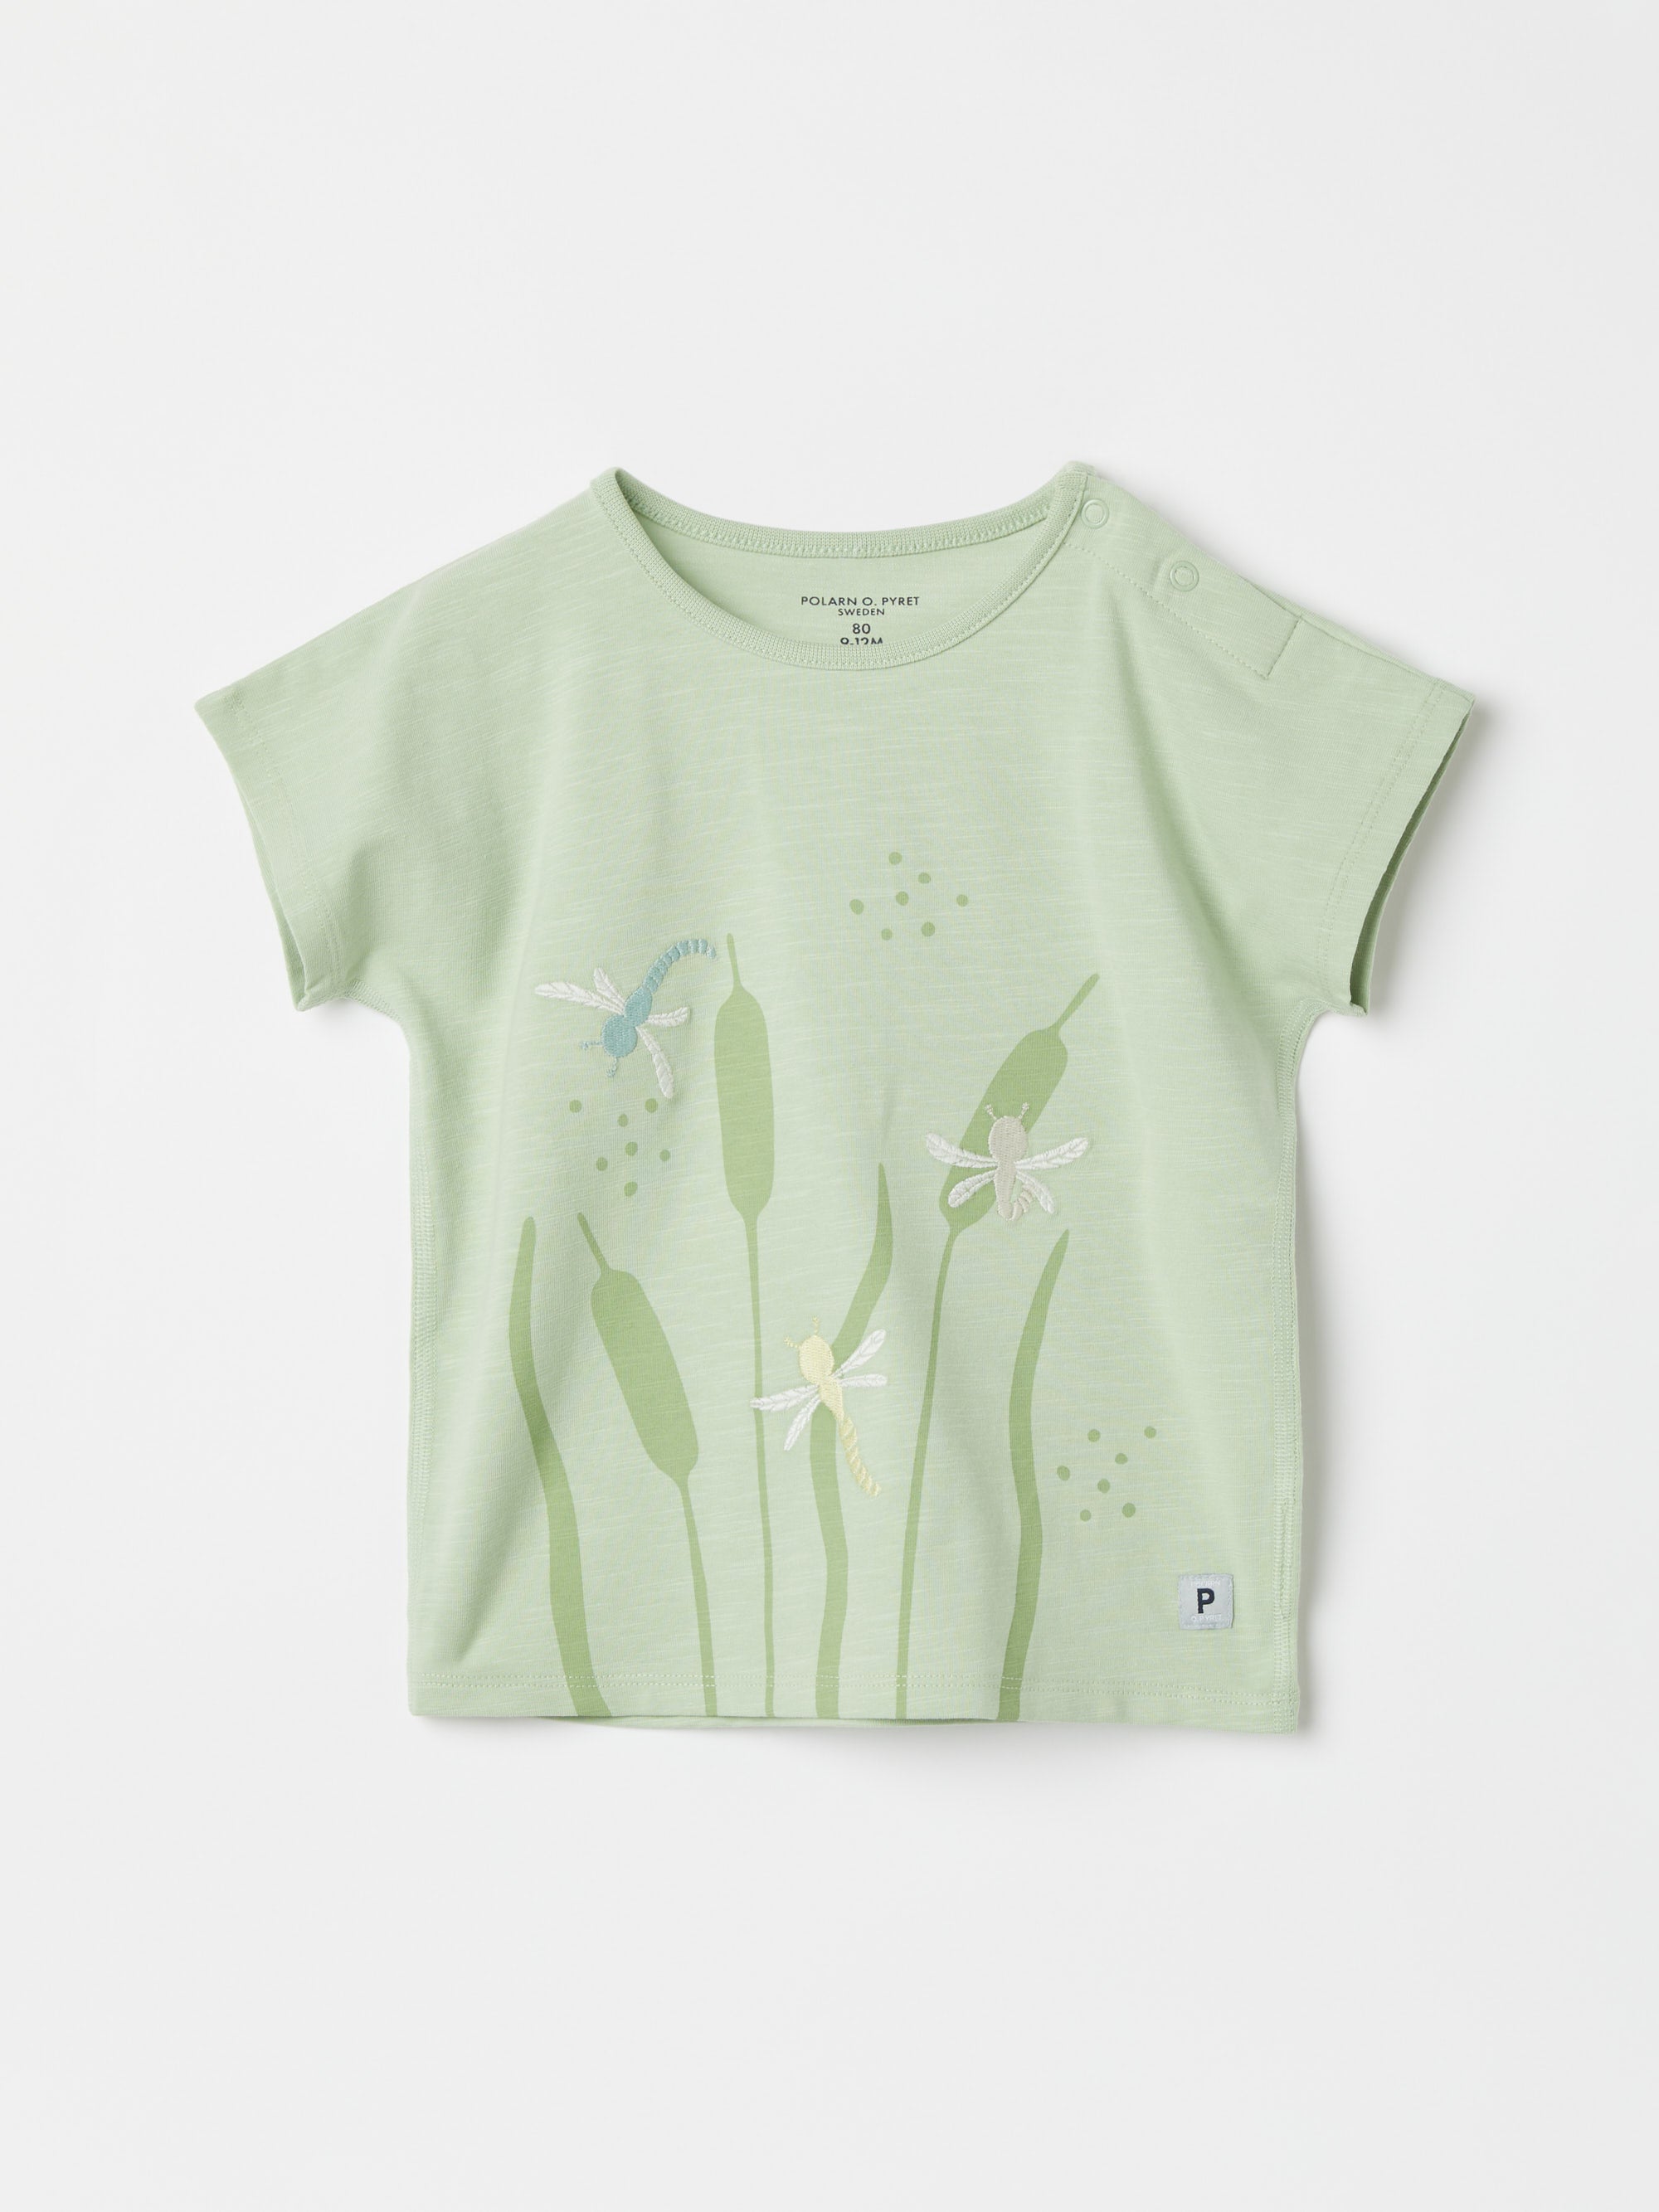 Embroidered Dragonfly Baby T-Shirt